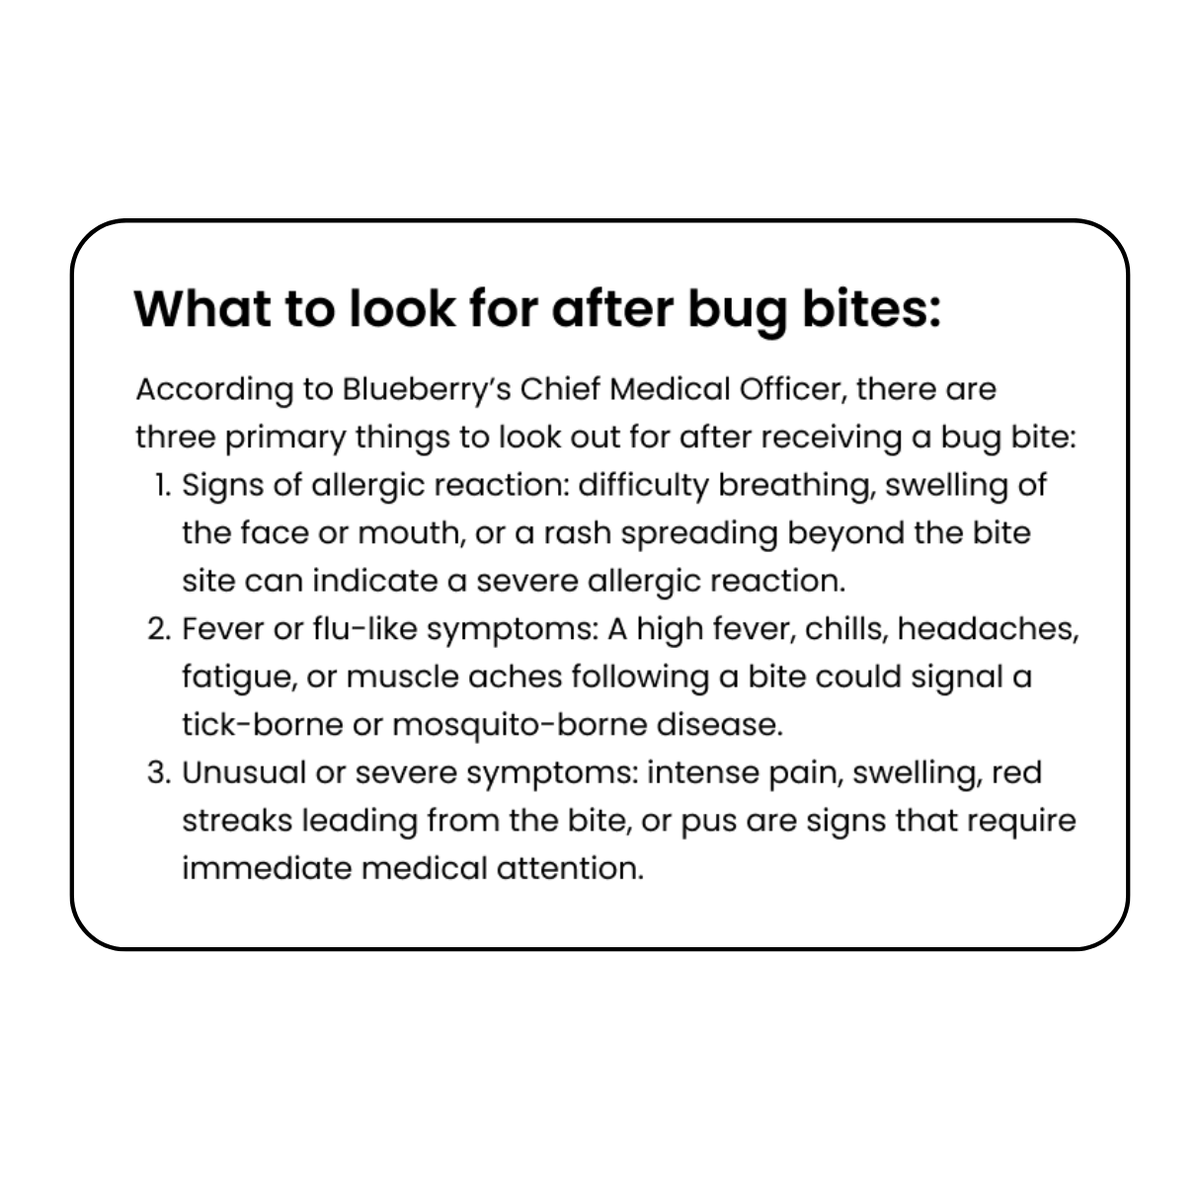 Bug bites are on the rise across the U.S. as springtime arrives; now is the best time to prepare to keep your family prepared for outdoor adventures!

#blueberryinsights #blueberrytrends #publichealth #healthtech #famtech #pediatriccare